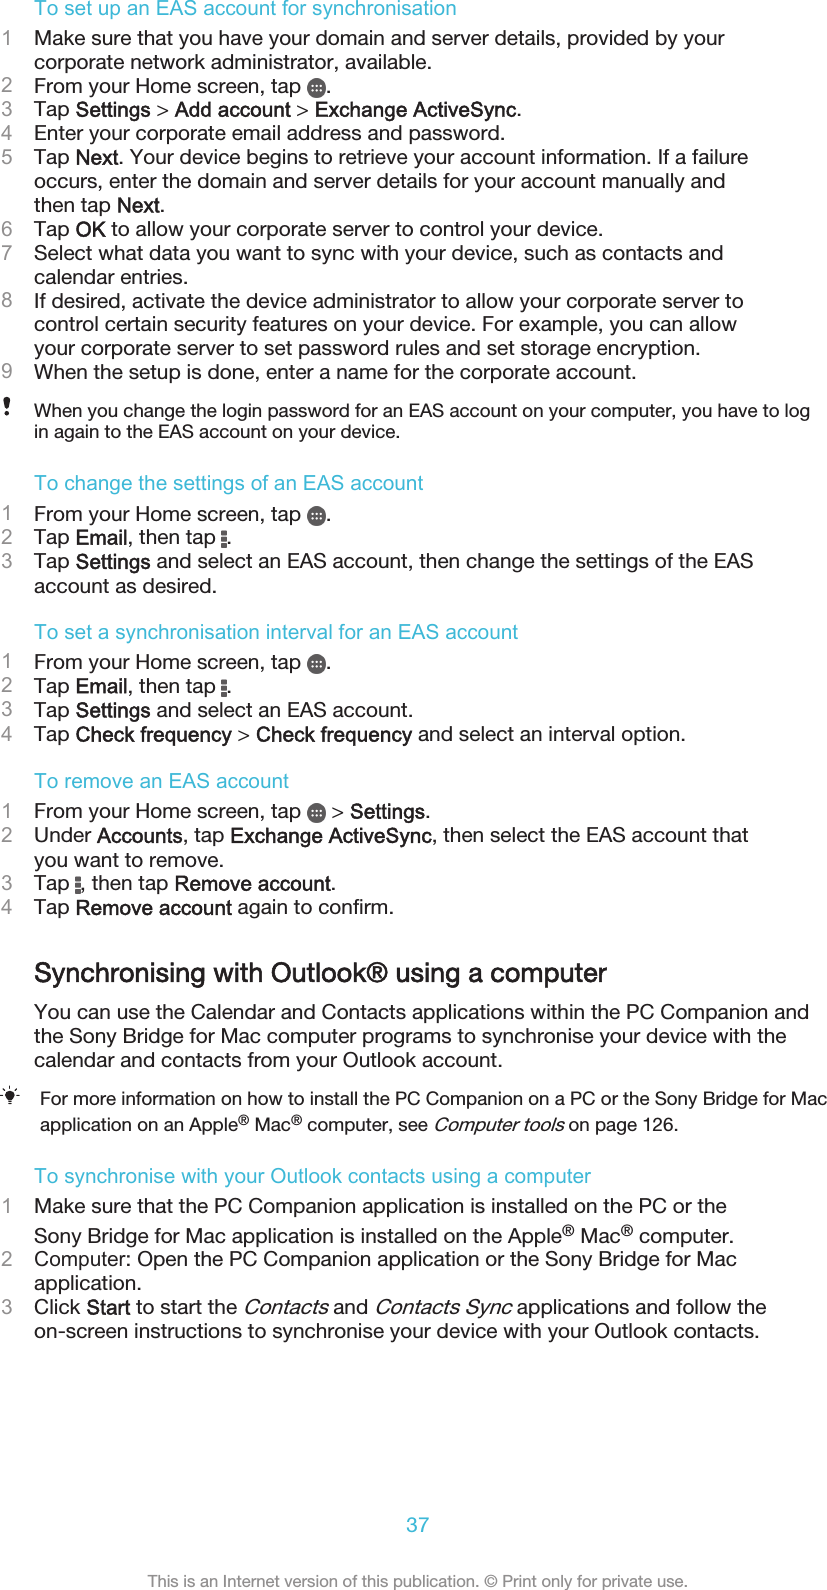 To set up an EAS account for synchronisation1Make sure that you have your domain and server details, provided by yourcorporate network administrator, available.2From your Home screen, tap  .3Tap Settings &gt; Add account &gt; Exchange ActiveSync.4Enter your corporate email address and password.5Tap Next. Your device begins to retrieve your account information. If a failureoccurs, enter the domain and server details for your account manually andthen tap Next.6Tap OK to allow your corporate server to control your device.7Select what data you want to sync with your device, such as contacts andcalendar entries.8If desired, activate the device administrator to allow your corporate server tocontrol certain security features on your device. For example, you can allowyour corporate server to set password rules and set storage encryption.9When the setup is done, enter a name for the corporate account.When you change the login password for an EAS account on your computer, you have to login again to the EAS account on your device.To change the settings of an EAS account1From your Home screen, tap  .2Tap Email, then tap  .3Tap Settings and select an EAS account, then change the settings of the EASaccount as desired.To set a synchronisation interval for an EAS account1From your Home screen, tap  .2Tap Email, then tap  .3Tap Settings and select an EAS account.4Tap Check frequency &gt; Check frequency and select an interval option.To remove an EAS account1From your Home screen, tap   &gt; Settings.2Under Accounts, tap Exchange ActiveSync, then select the EAS account thatyou want to remove.3Tap  , then tap Remove account.4Tap Remove account again to confirm.Synchronising with Outlook® using a computerYou can use the Calendar and Contacts applications within the PC Companion andthe Sony Bridge for Mac computer programs to synchronise your device with thecalendar and contacts from your Outlook account.For more information on how to install the PC Companion on a PC or the Sony Bridge for Macapplication on an Apple® Mac® computer, see Computer tools on page 126.To synchronise with your Outlook contacts using a computer1Make sure that the PC Companion application is installed on the PC or theSony Bridge for Mac application is installed on the Apple® Mac® computer.2Computer: Open the PC Companion application or the Sony Bridge for Macapplication.3Click Start to start the Contacts and Contacts Sync applications and follow theon-screen instructions to synchronise your device with your Outlook contacts.37This is an Internet version of this publication. © Print only for private use.